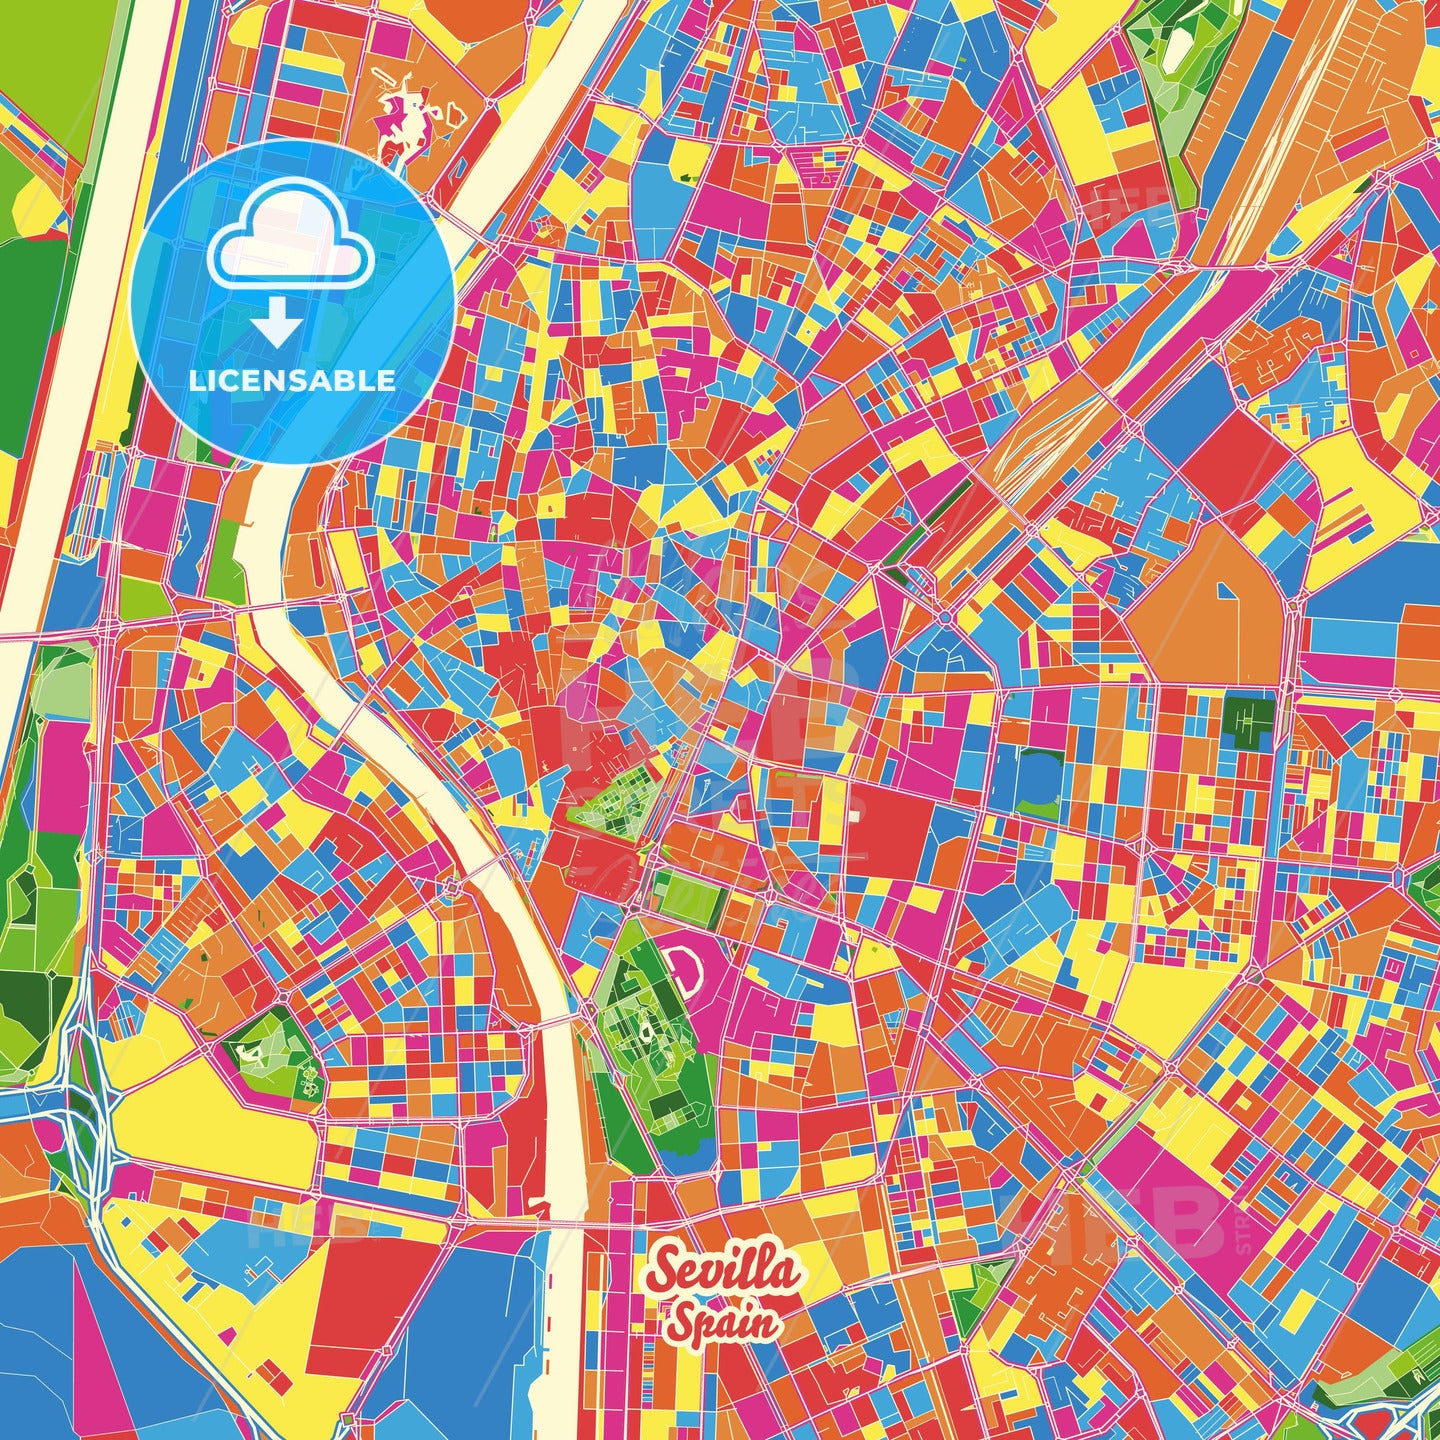 Sevilla, Spain Crazy Colorful Street Map Poster Template - HEBSTREITS Sketches